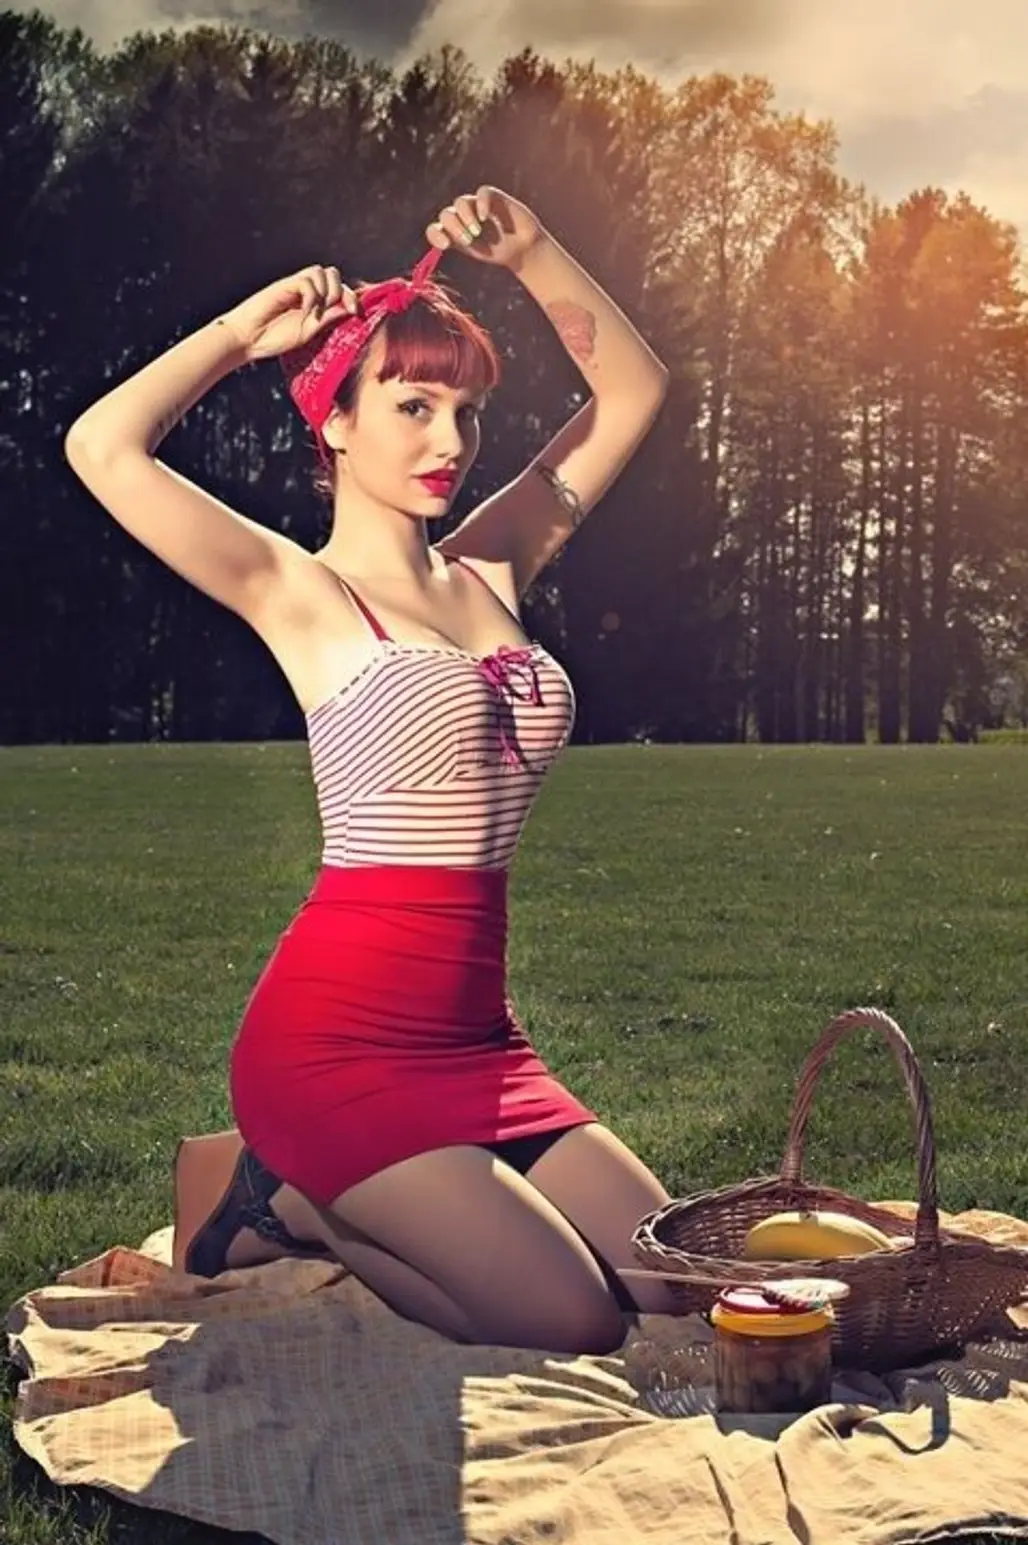 11 Fun Ideas to Try for a Rockabilly Look